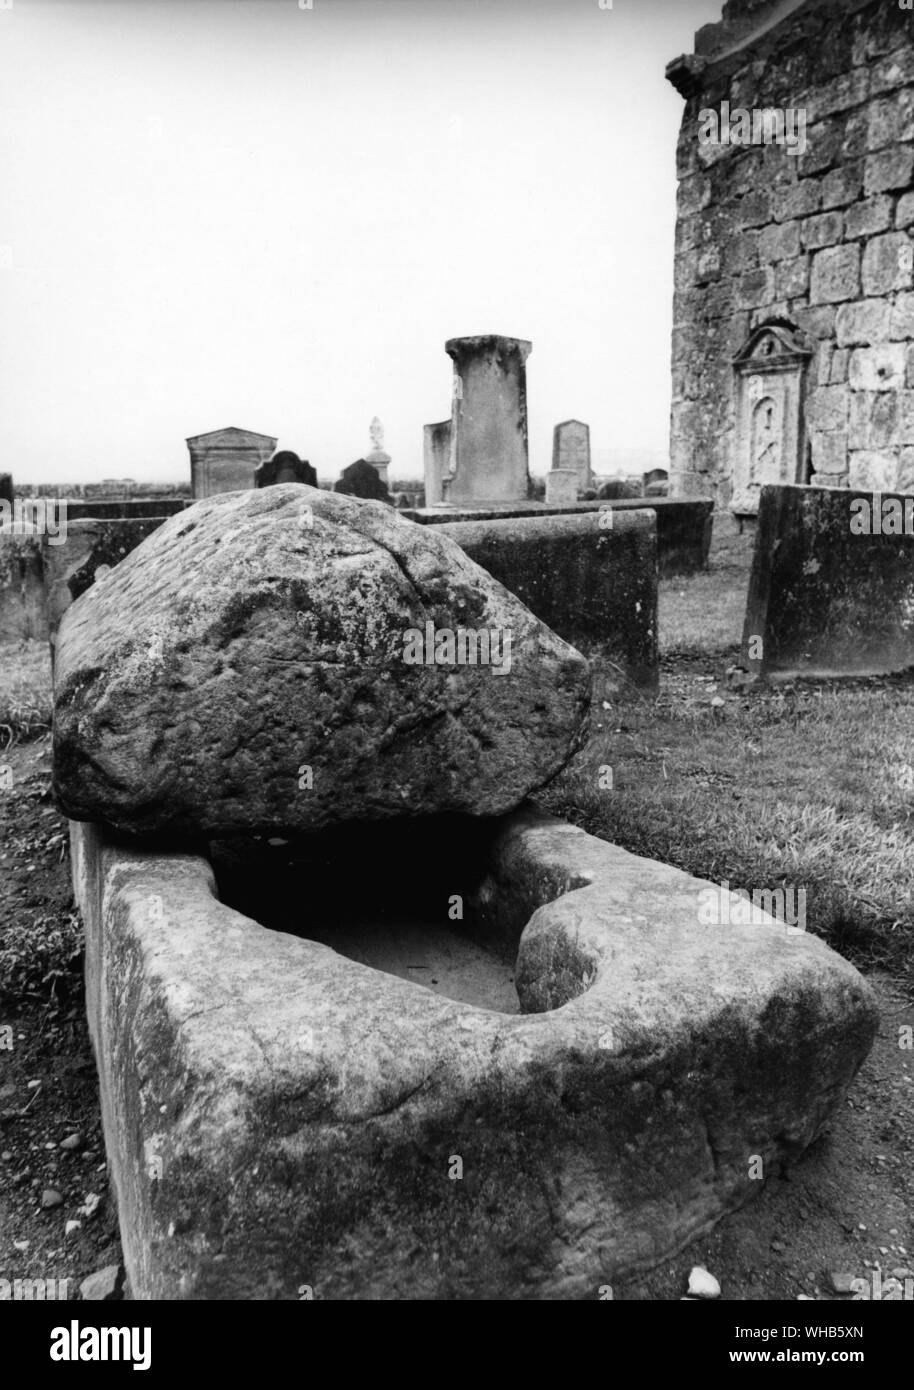 The stone hollowed in the form of Martha Wishart at Tullibody. .. On the North side of the Auld Kirk is the Maiden Stone, the stone coffin in which the Maid was laid to rest.. the priest of Tullibody, Peter Beaton, is said to have got the Myretoun Maid, Martha Wishart, pregnant. Martha was the daughter of the Laird of Myretoun The priest, after completely winning the damsels affections, proved insincere. He is said to have been lured by the prospect of ecclesiastical advancement and broken his vows to the maid. The maid died of a broken heart because of the affair. On her death-bed she gave Stock Photo